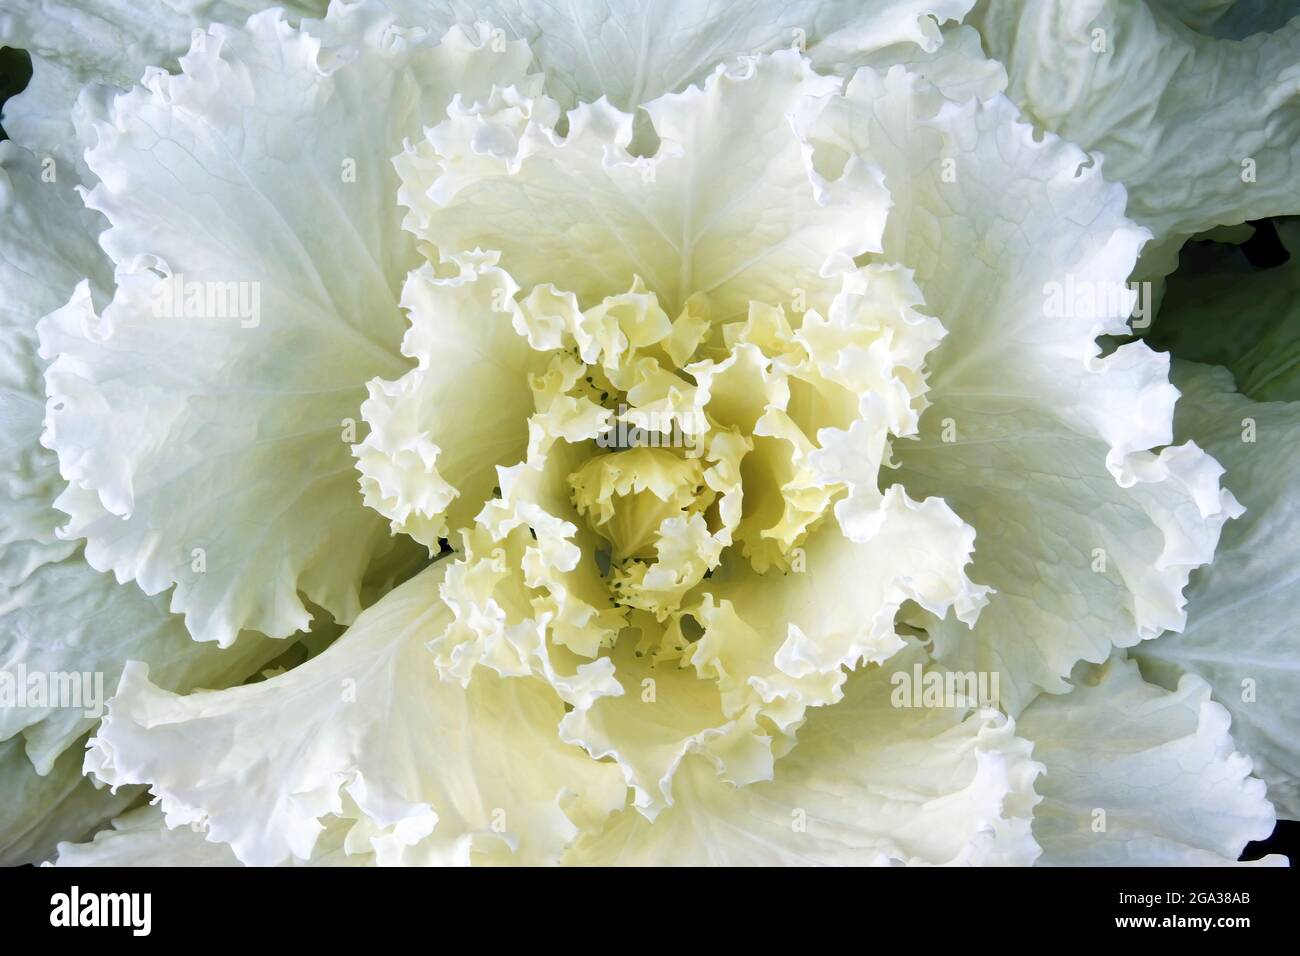 Close-up detail of the white petals on a blossom; Napa Valley, California, United States of America Stock Photo